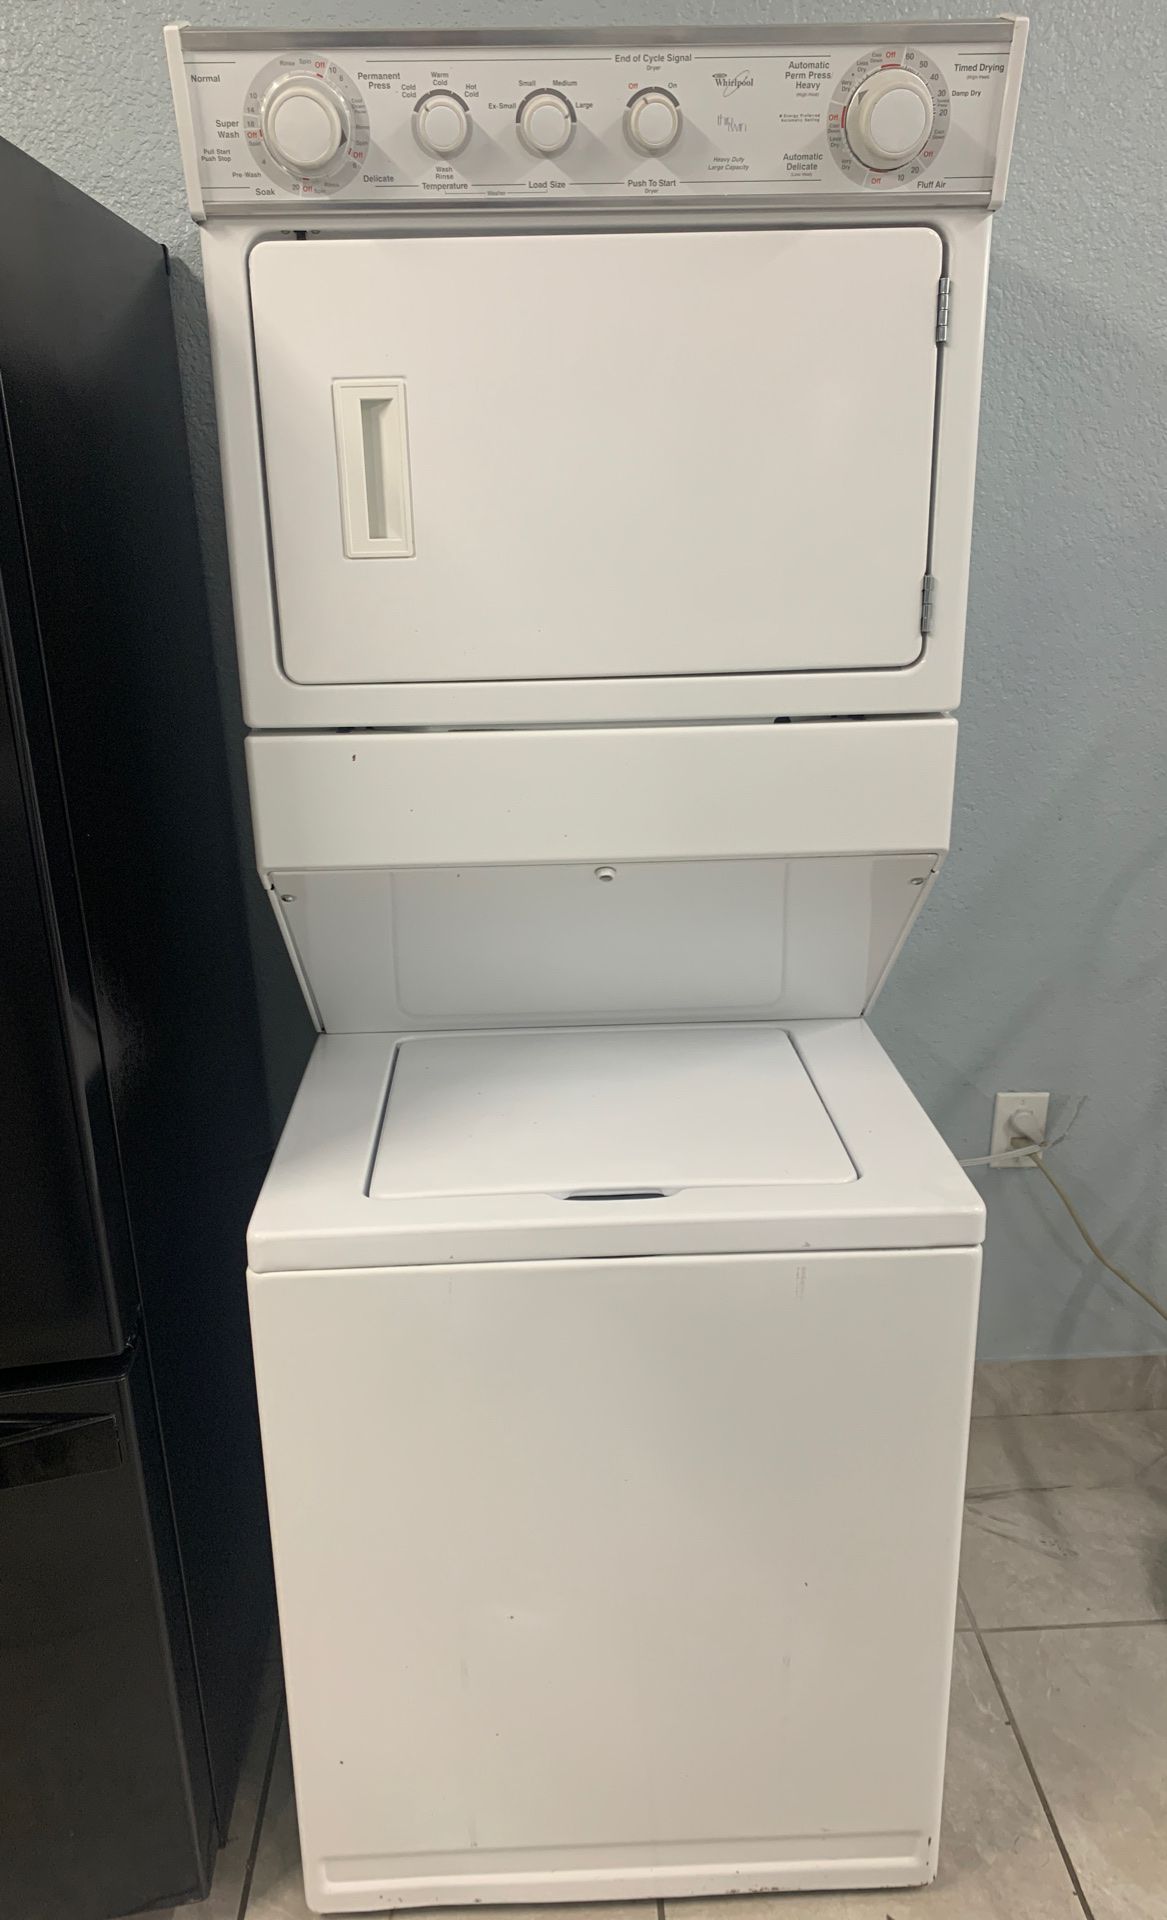 Large capacity stackable washer and dryer set